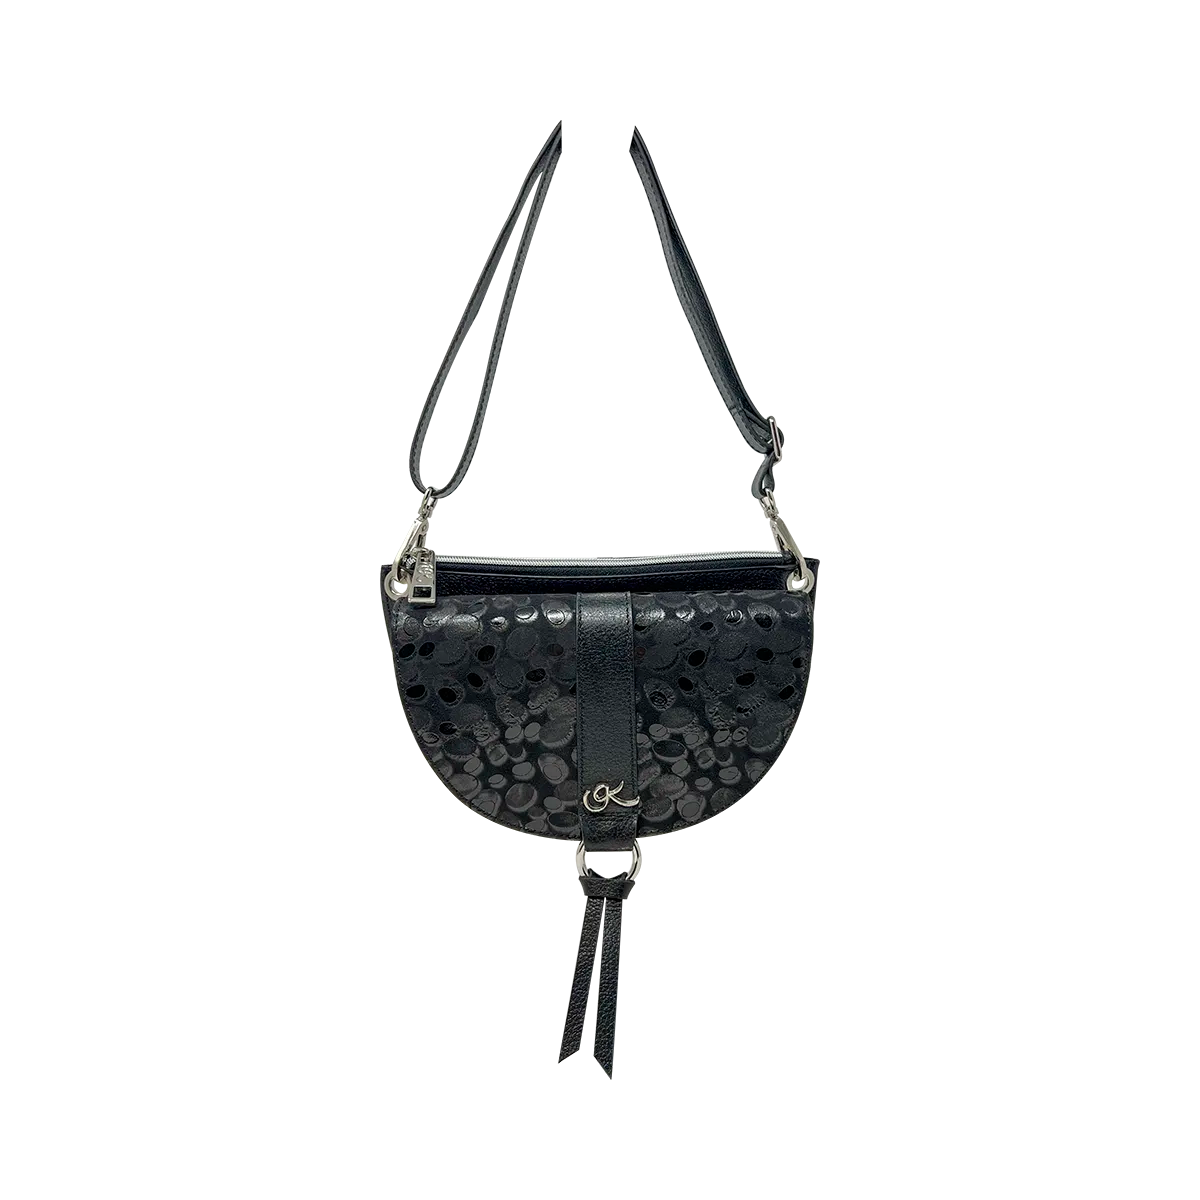 goute black strip leather crossbody bag and fanny pack. Accessory for women in San Diego, CA.